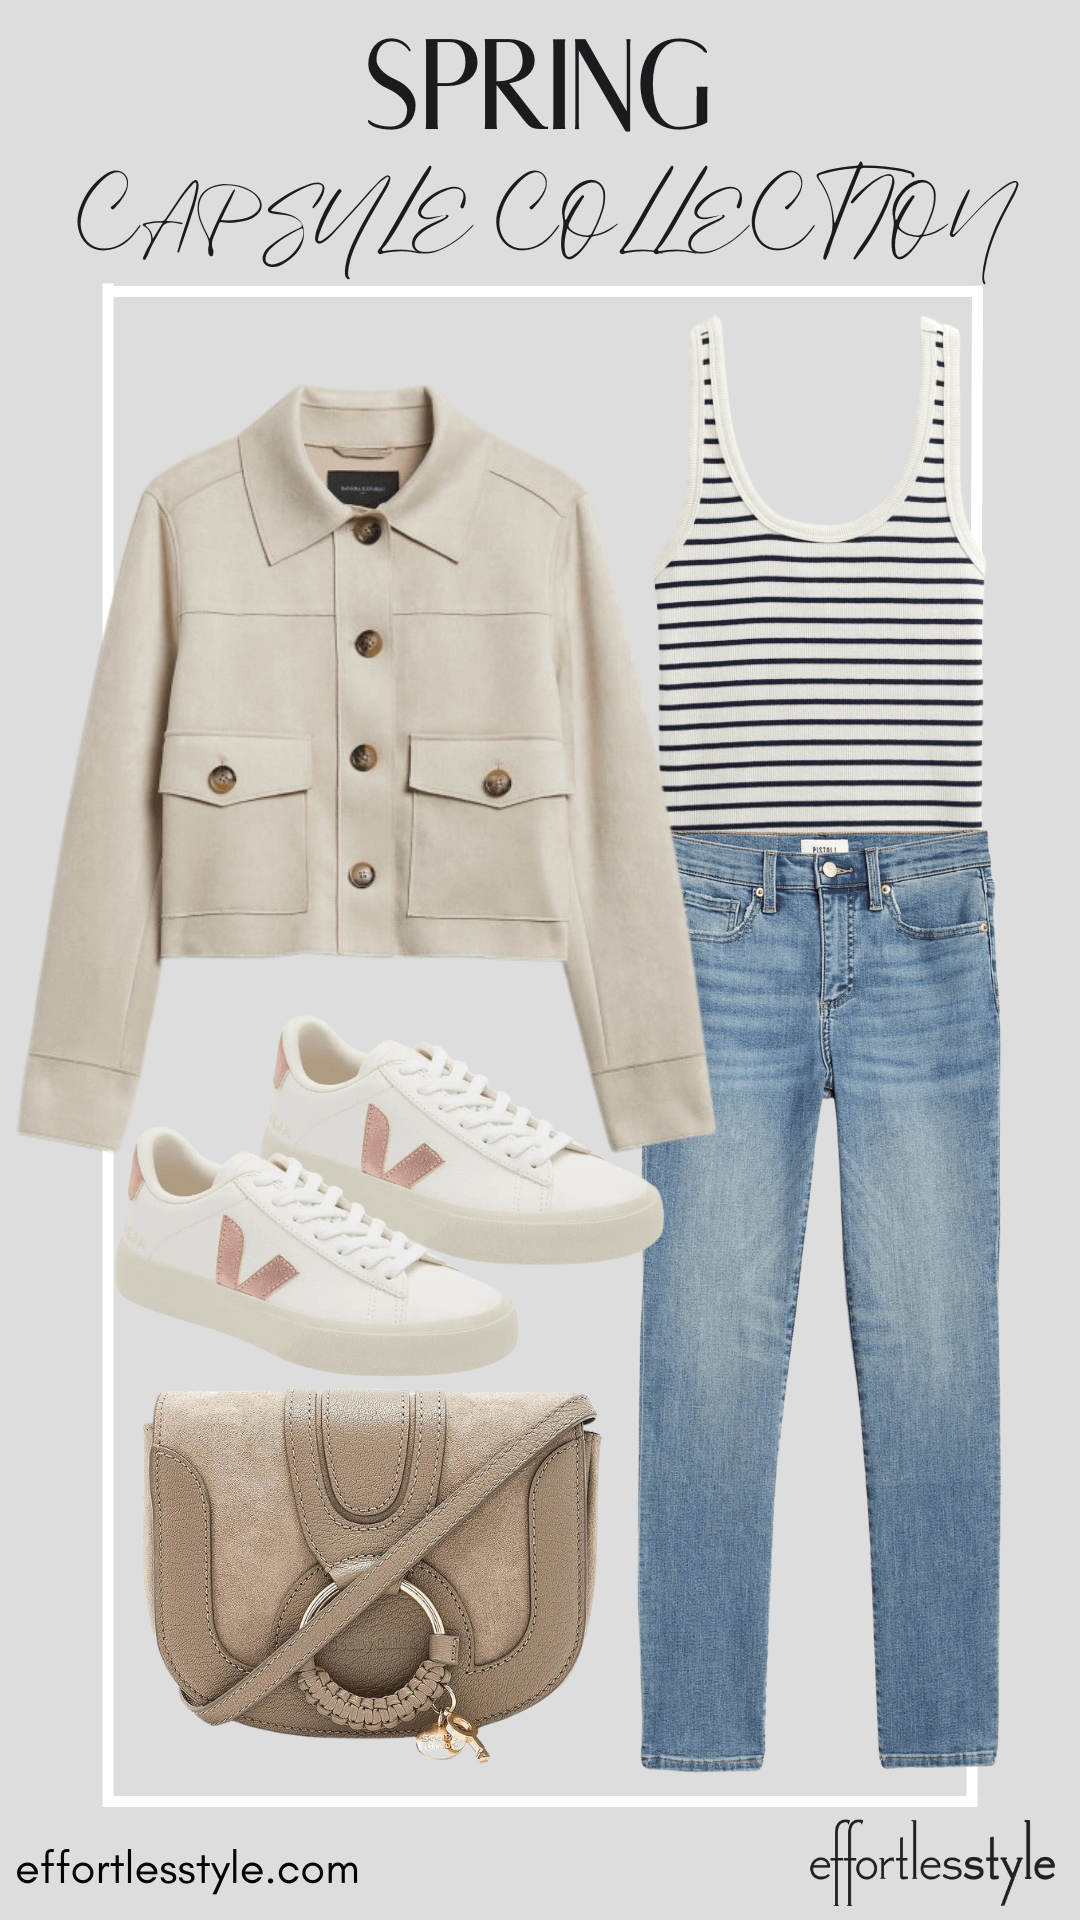 How To Wear Our Spring Capsule Wardrobe - Part 1 Striped Tank & Crop Jacket & Light Wash Jeans how to look cute for the ball fields this spring how to look cute for running errands quick and easy spring looks how to style your sneakers this spring